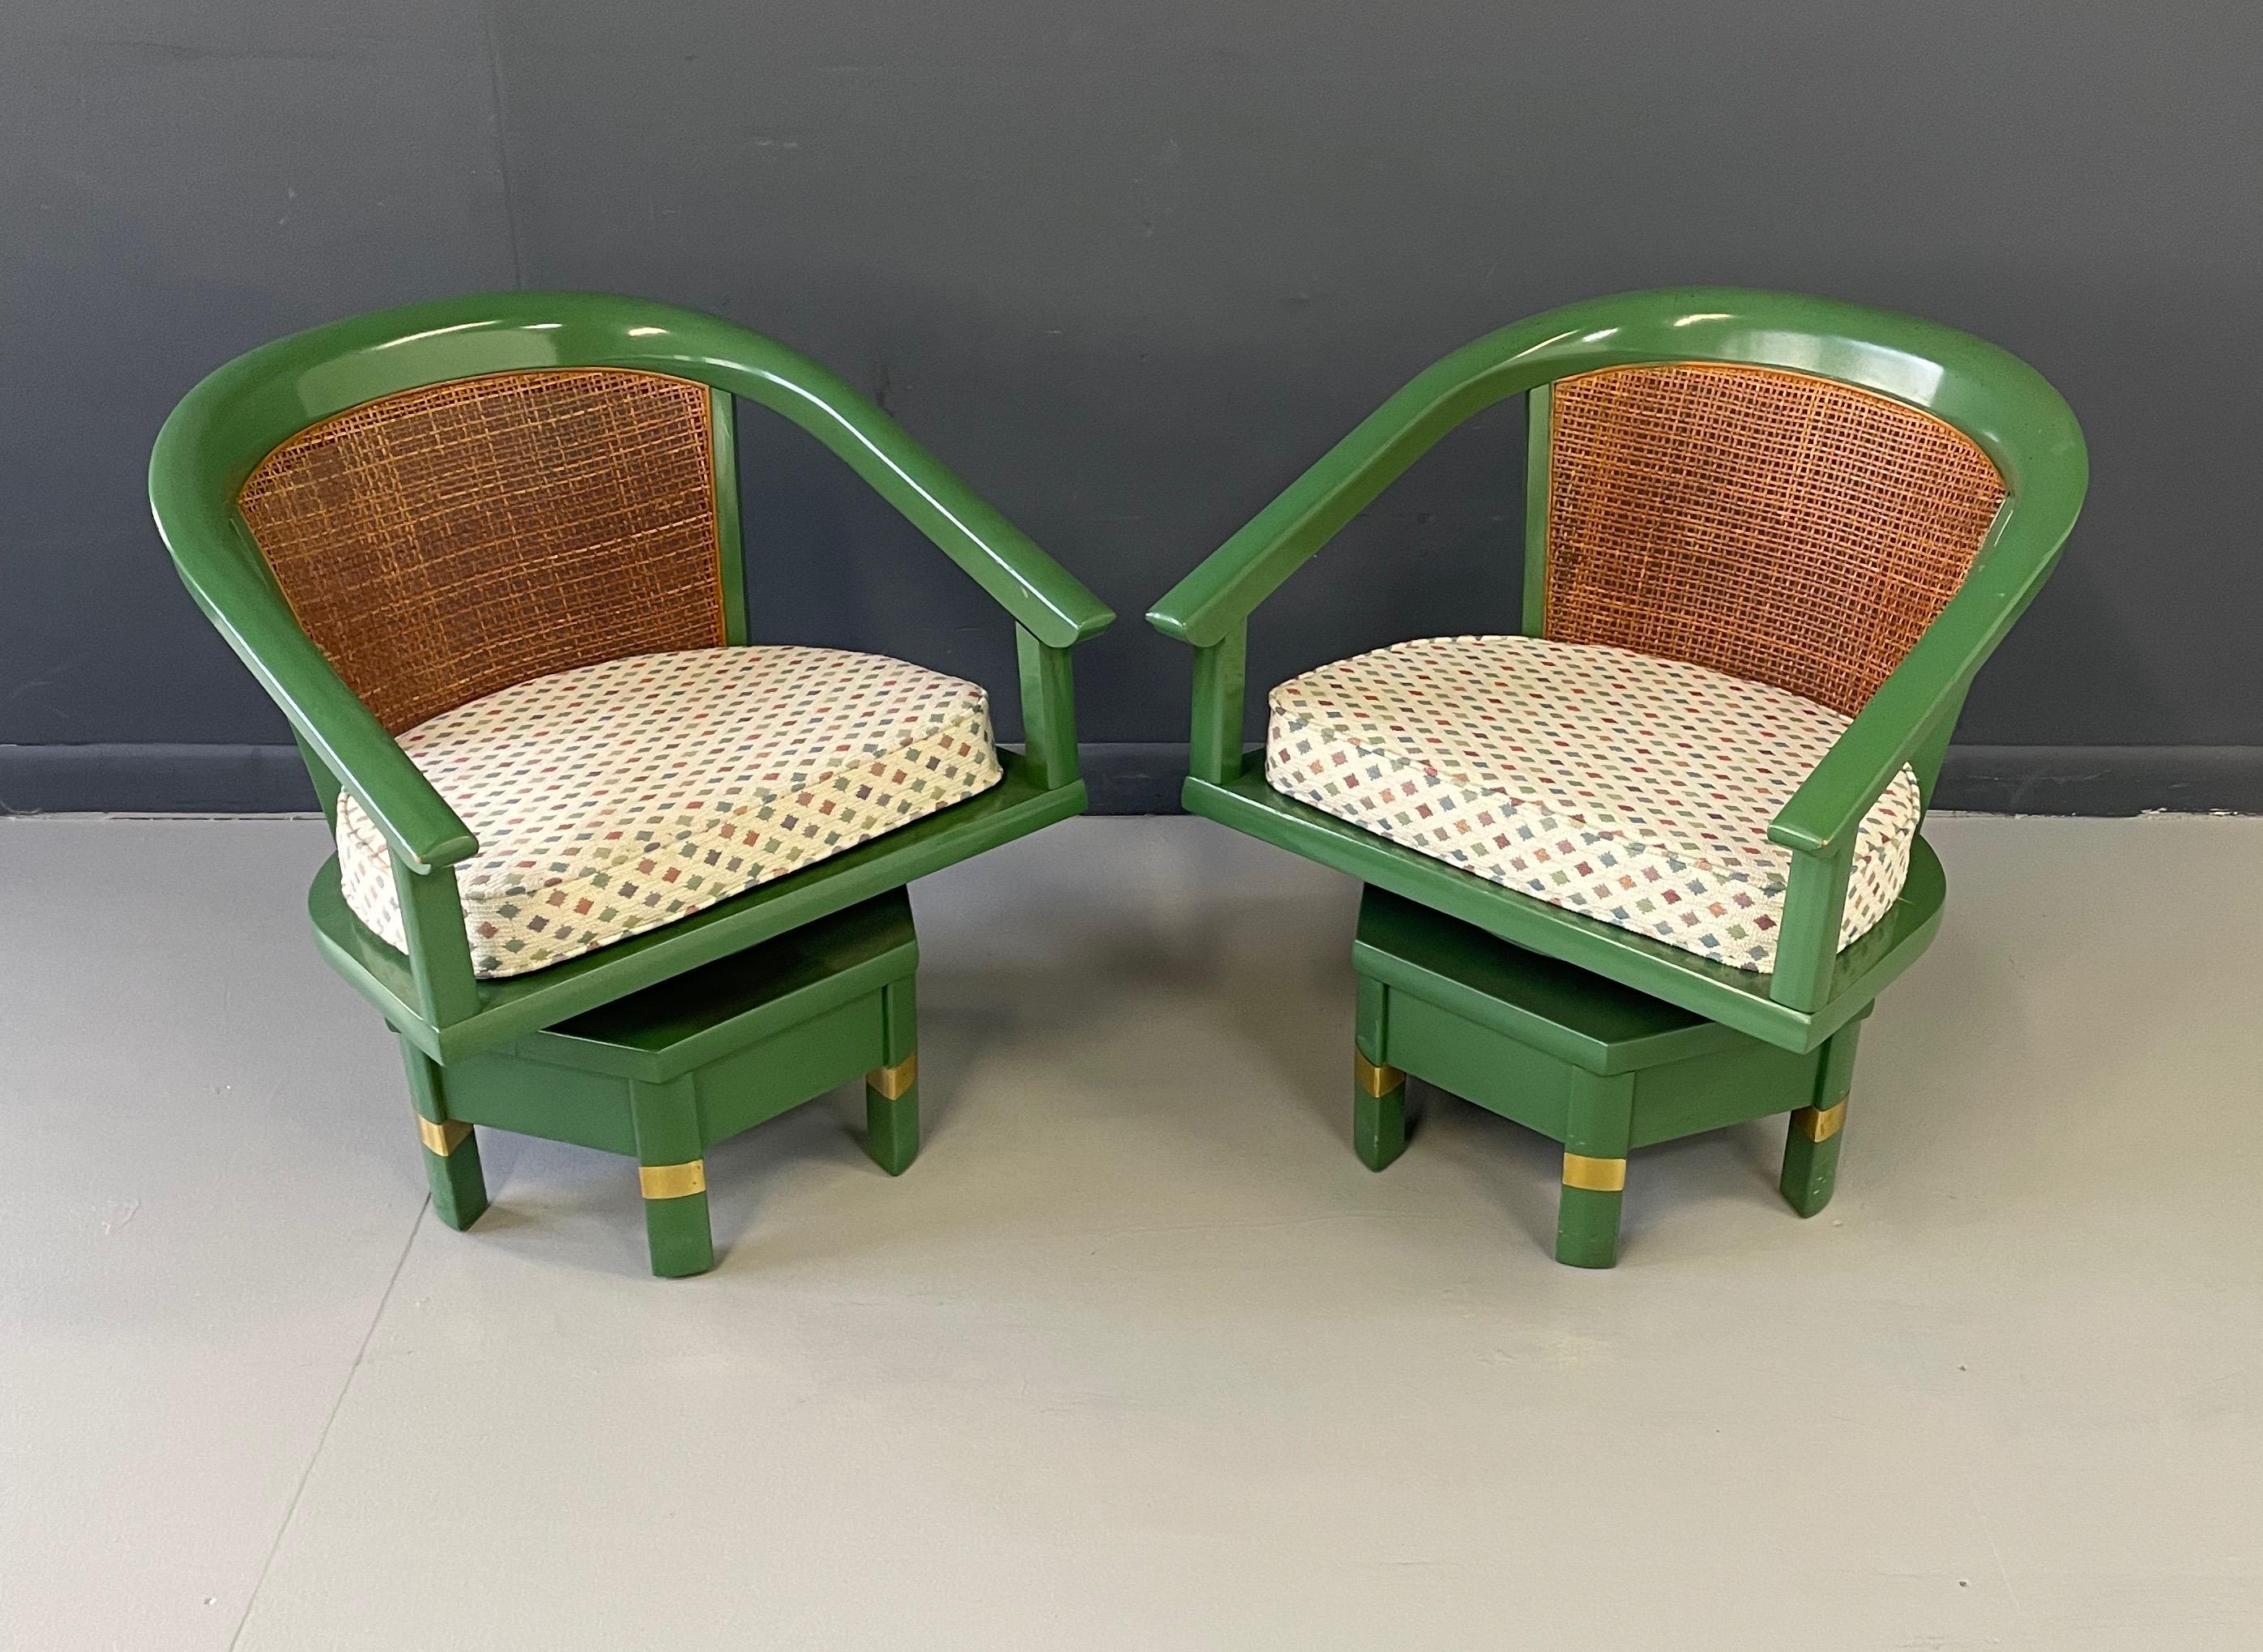 North American Trio of Cane Back Swivel Lounge Chairs Designed by Jim Peed for Hickory